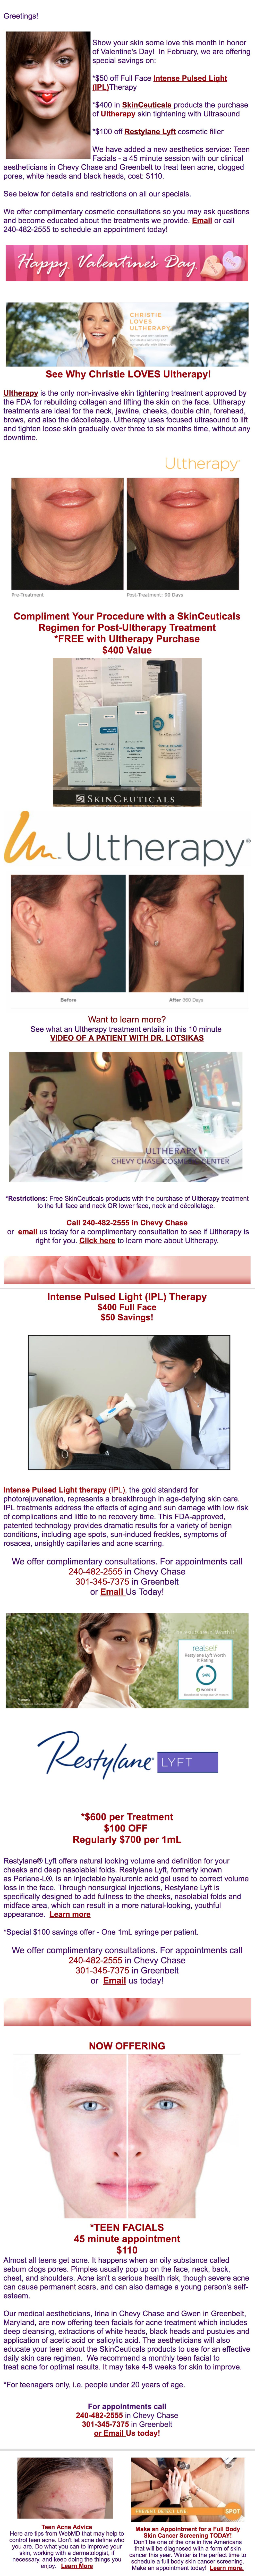 February 2018 Specials on Ultherapy Skinceuticals